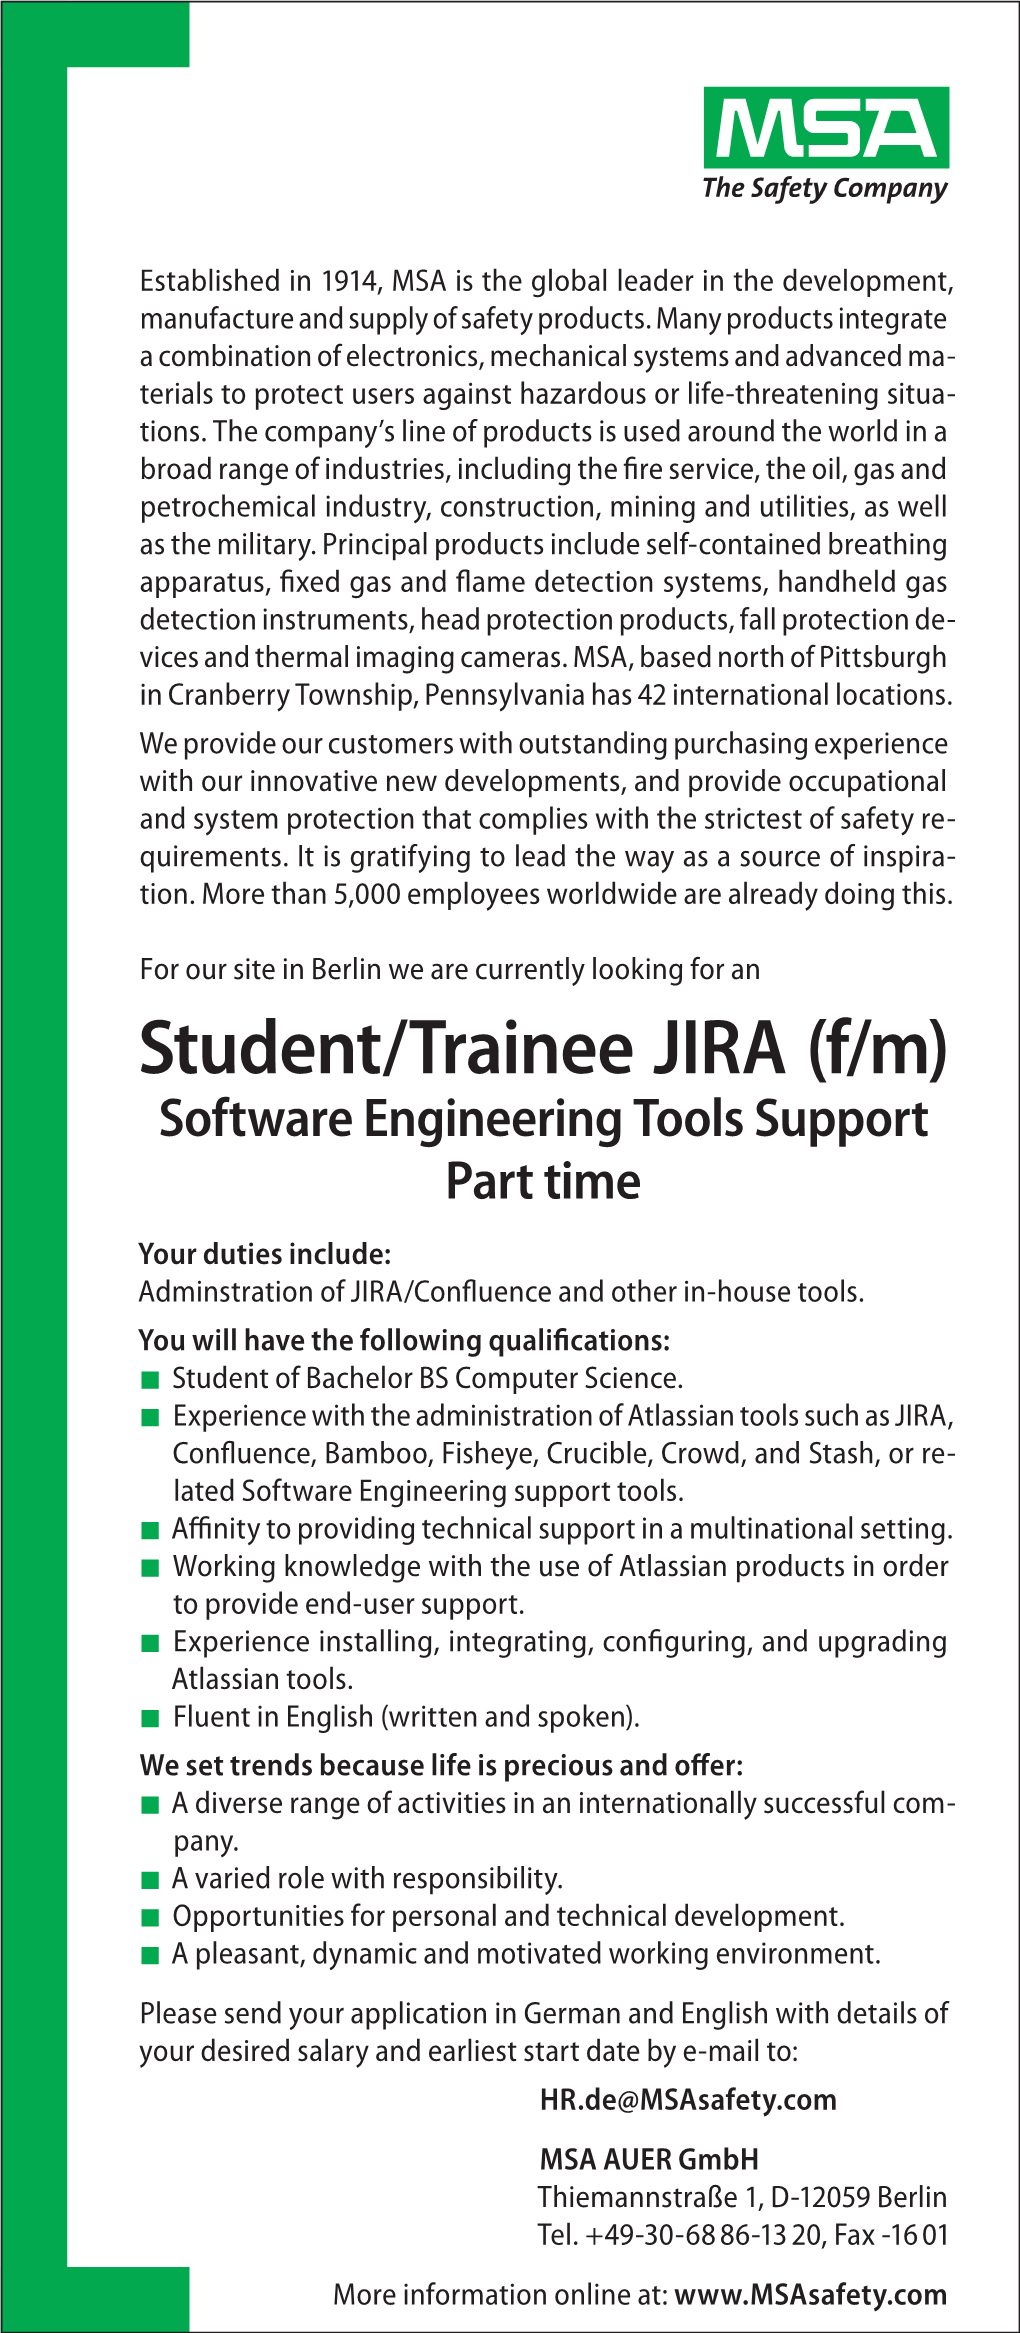 Student/Trainee JIRA (F/M) Software Engineering Tools Support Part Time Your Duties Include: Adminstration of JIRA/Confluence and Other In-House Tools